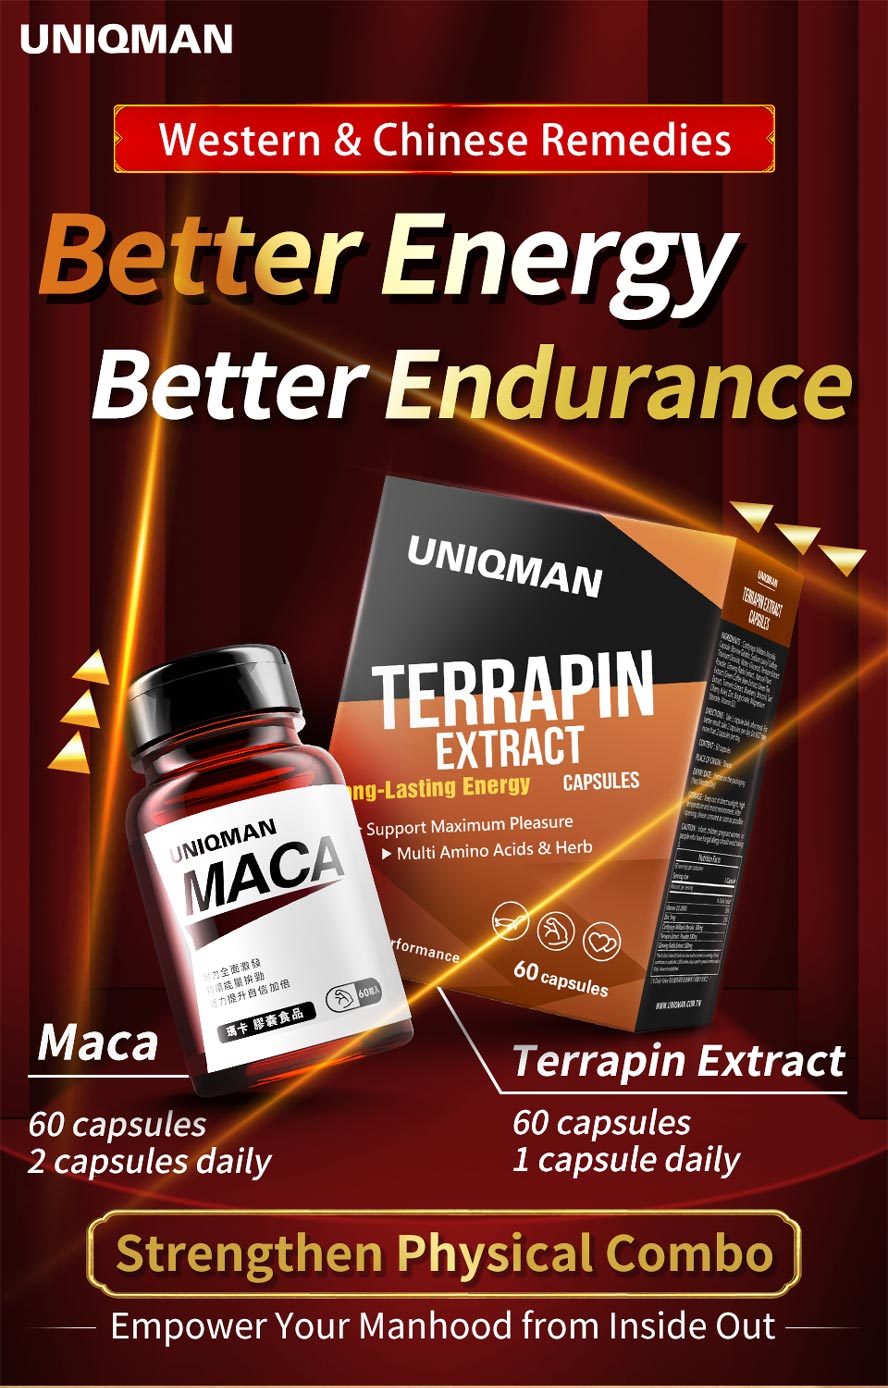 UNIQMAN Maca + Terrapin Extract can empower your manhood for strong vigour and longer lasting stamina.